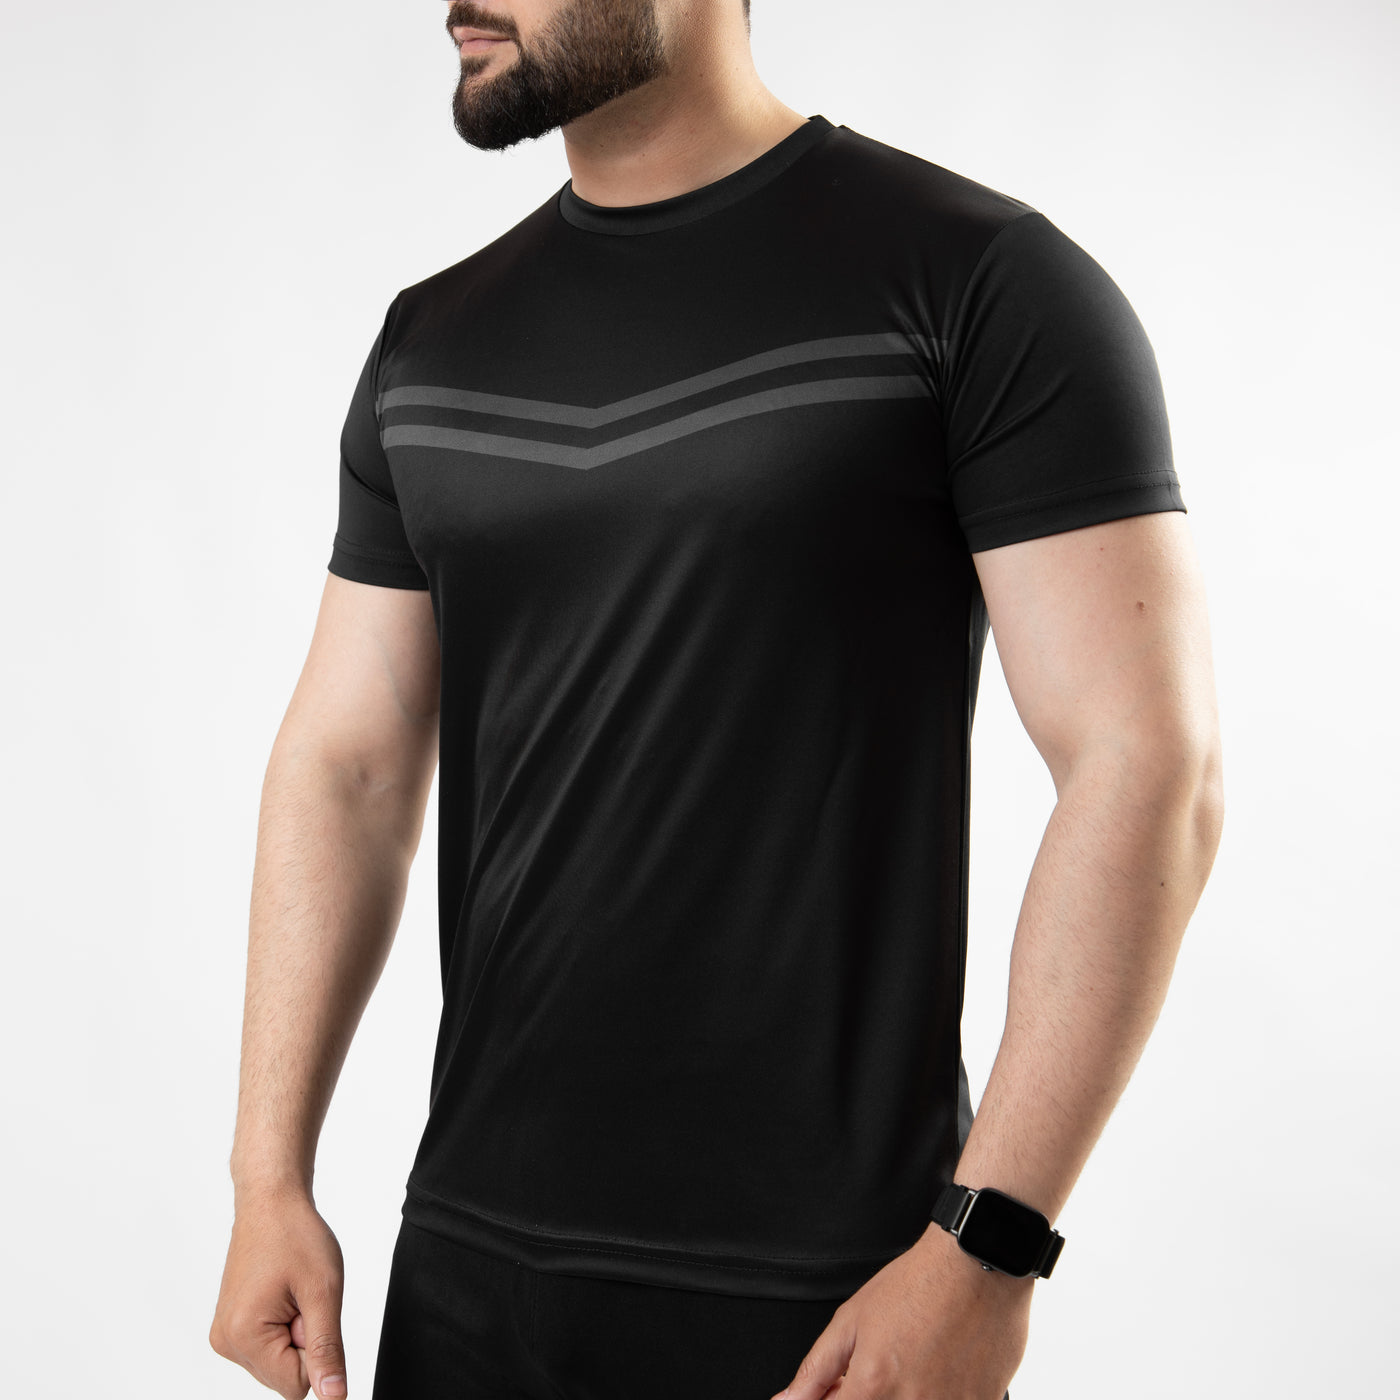 Premium Black Sublimated Quick Dry T-Shirt with Front Gray Stripes